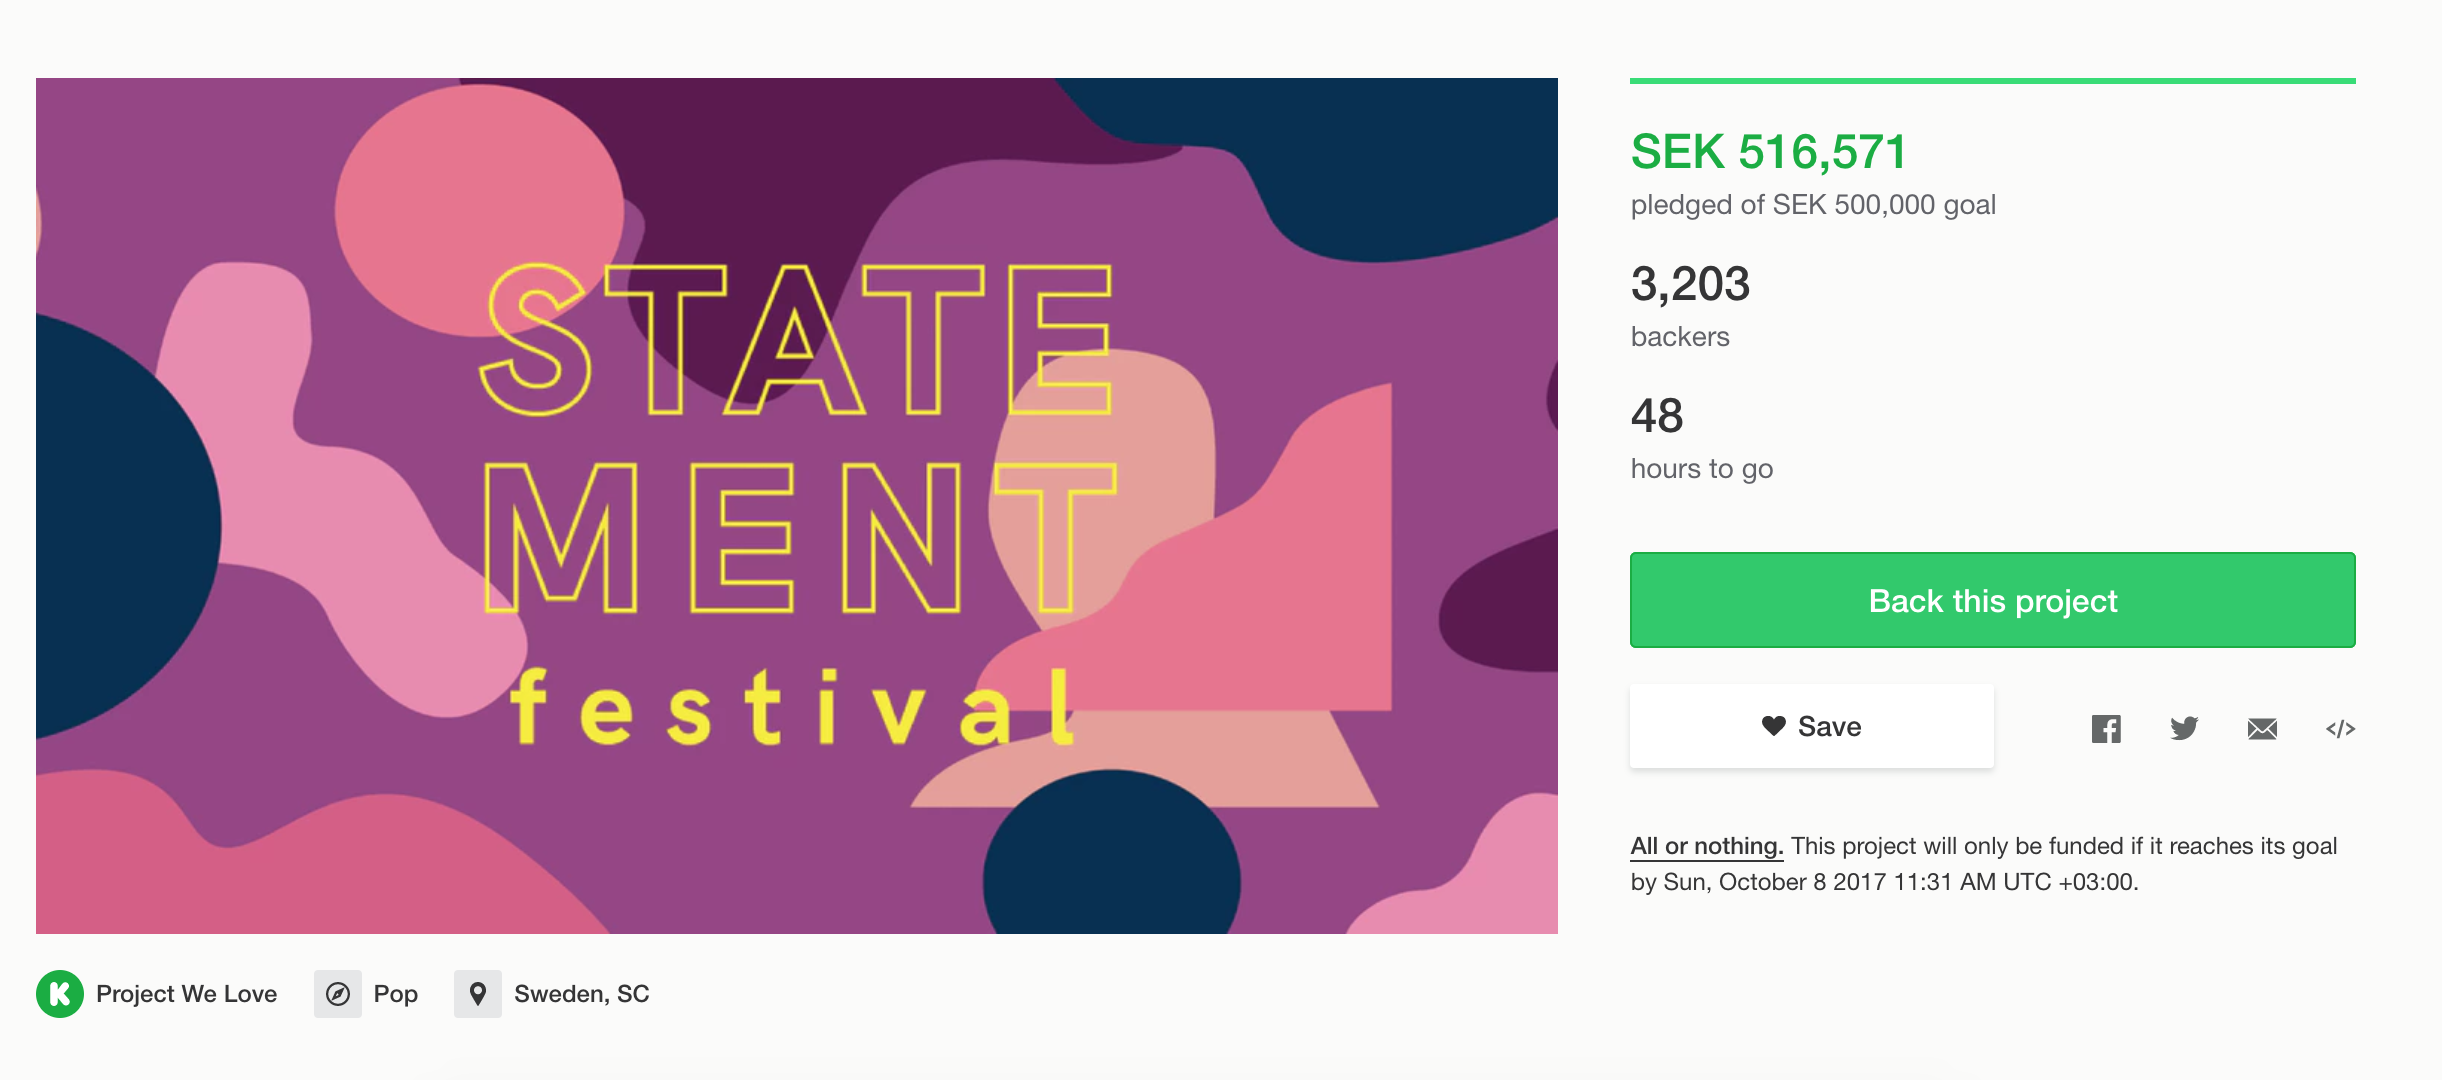 The Kickstarter page for women-only music event: Statement Festival